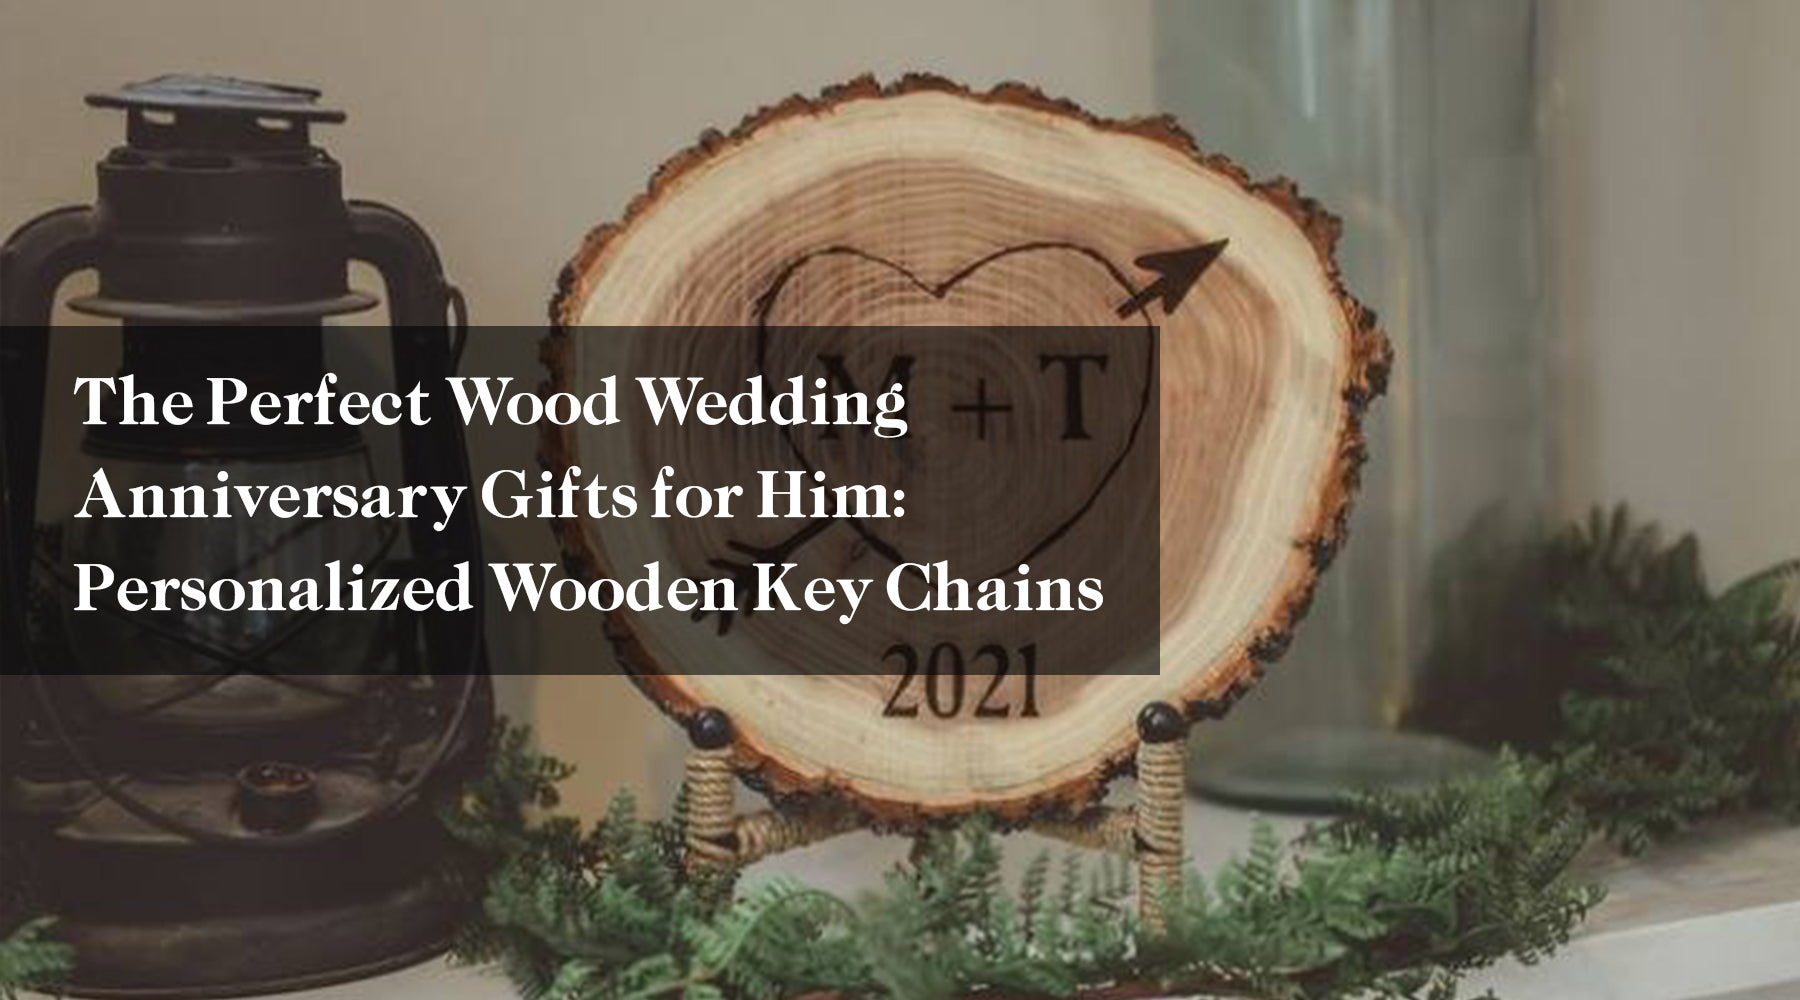 The Perfect Wood Wedding Anniversary Gifts for Him: Personalized Wooden Key Chains